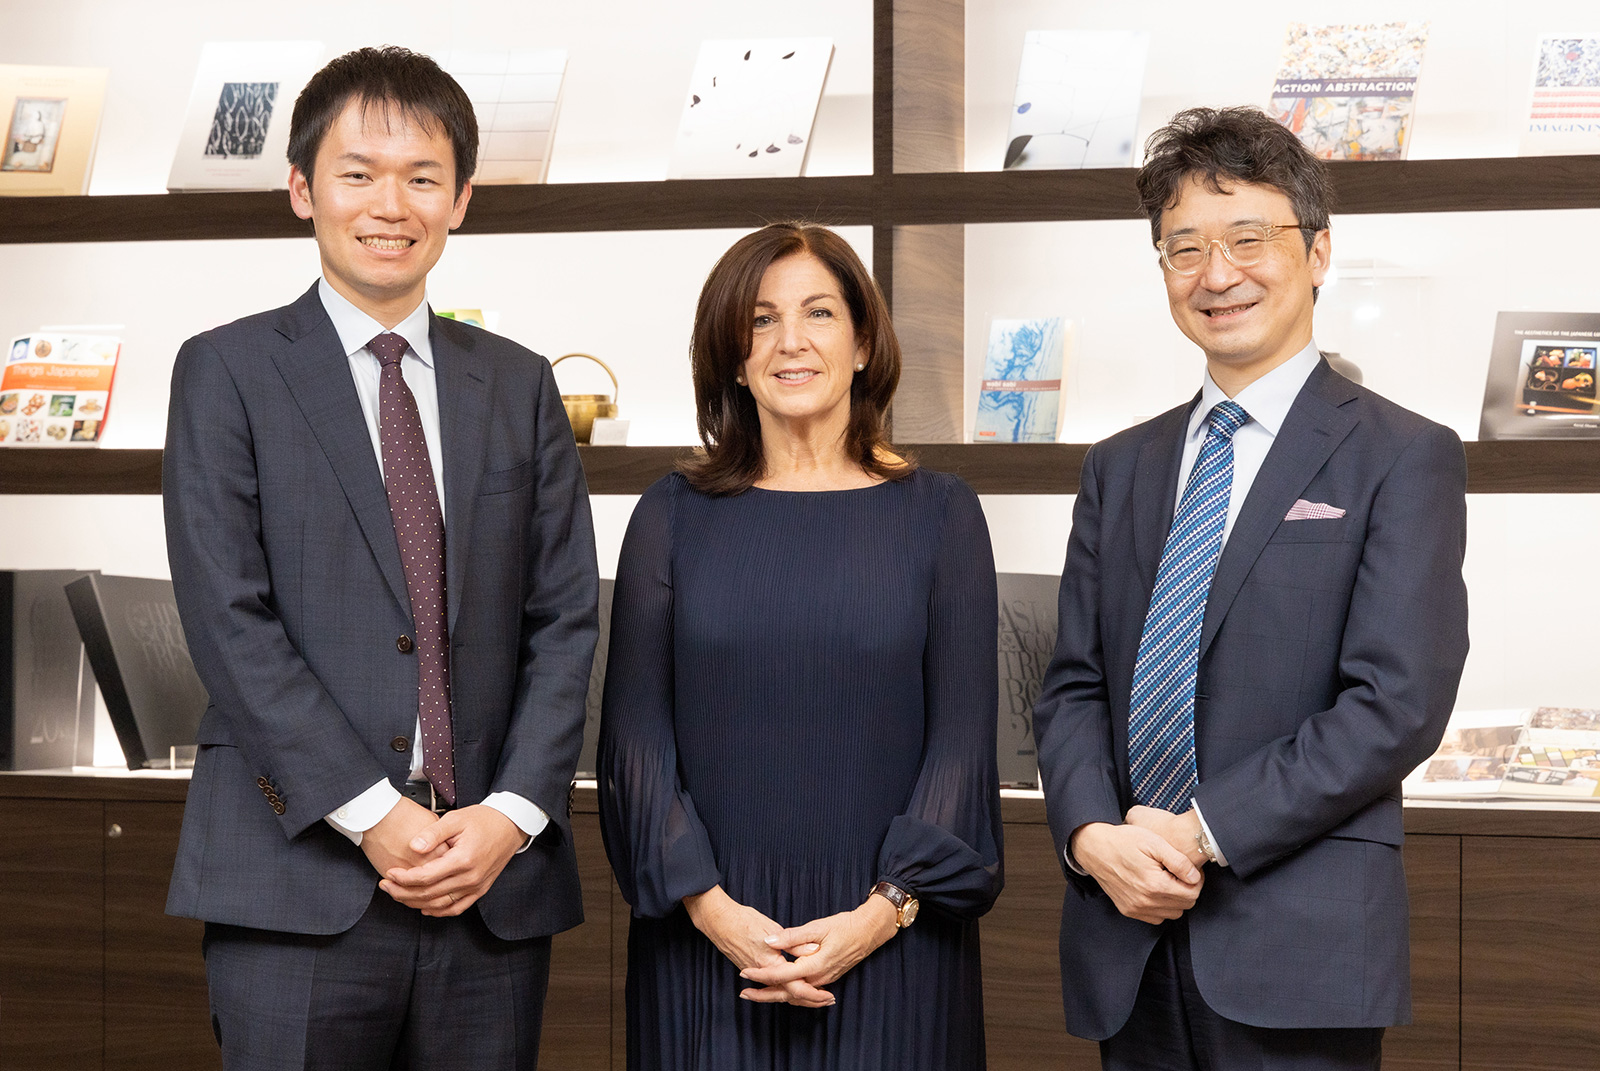 Left to Right:Takashi Shibano, DIC CVC Unit Member, Gina Domanig, Emerald Technology Ventures CEO, and Naotaka Gotoh, DIC Healthcare Business Unit Project Manager (former CVC team leader)